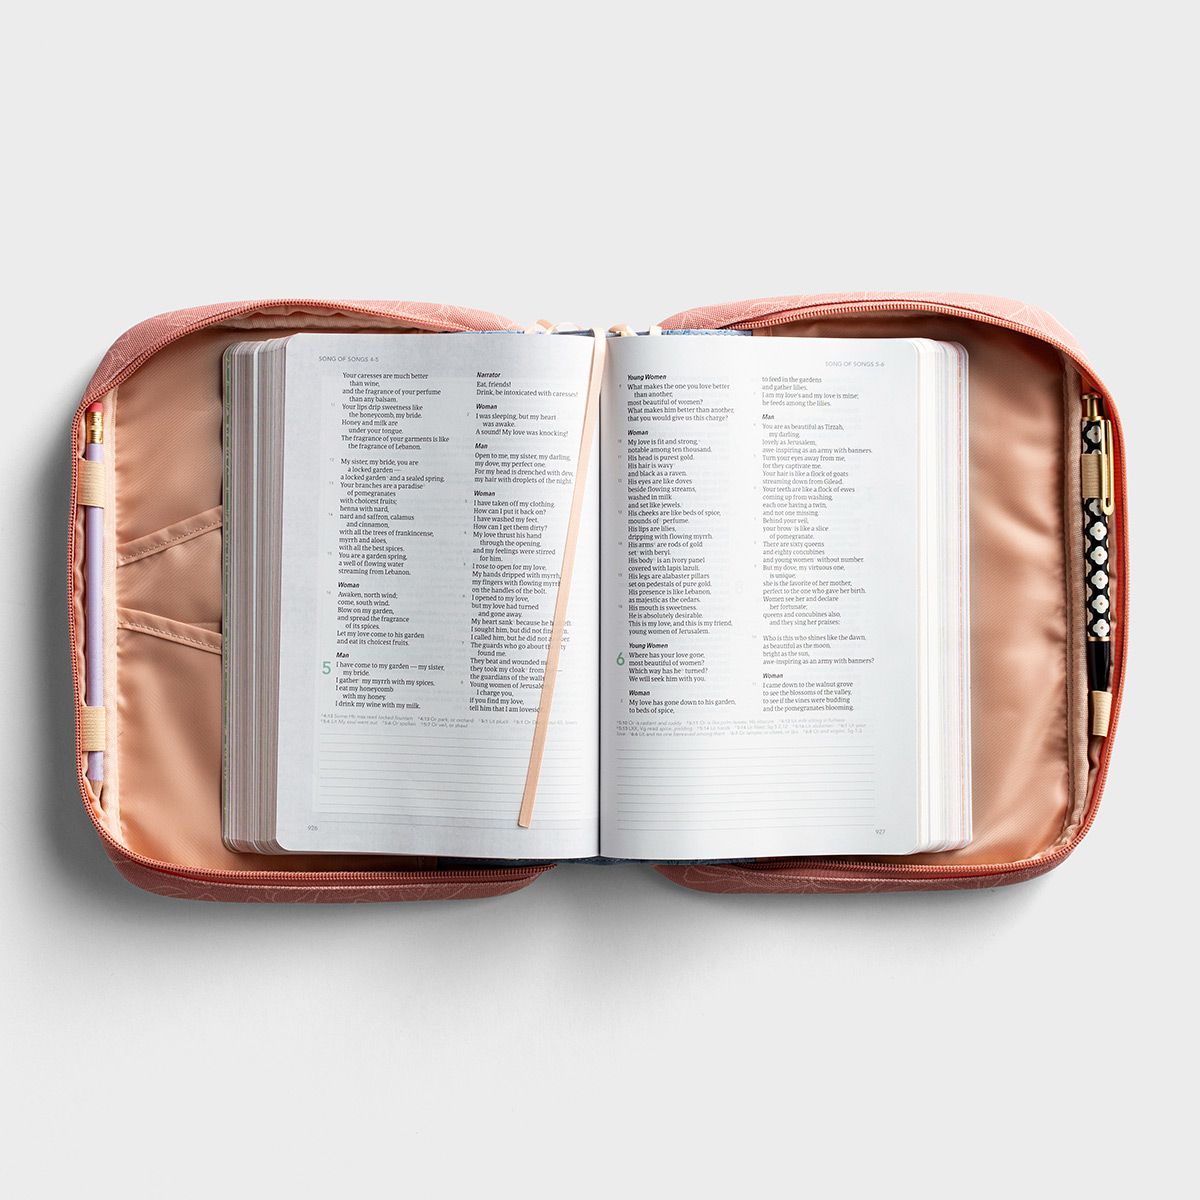 Grace Upon Grace - Bible Cover - The Christian Gift Company